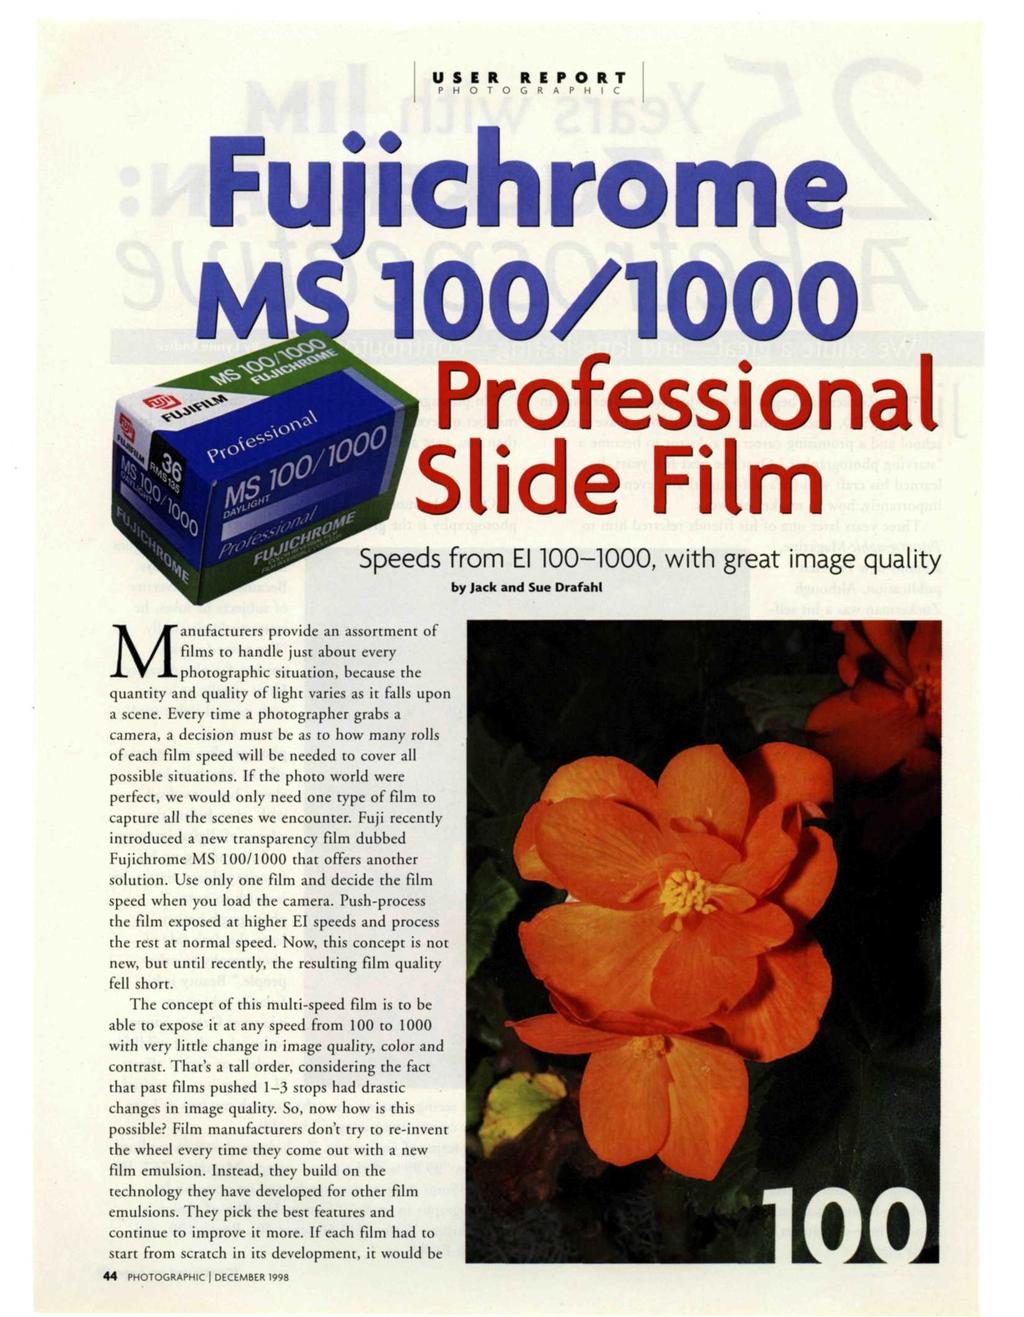 USER REPORT P H O T O G R A P H I C Fujichrome 100/1000 Professional Slide Film Speeds from El 100-1000, with great image quality by Jack and Sue Drafahl Manufacturers provide an assortment of films